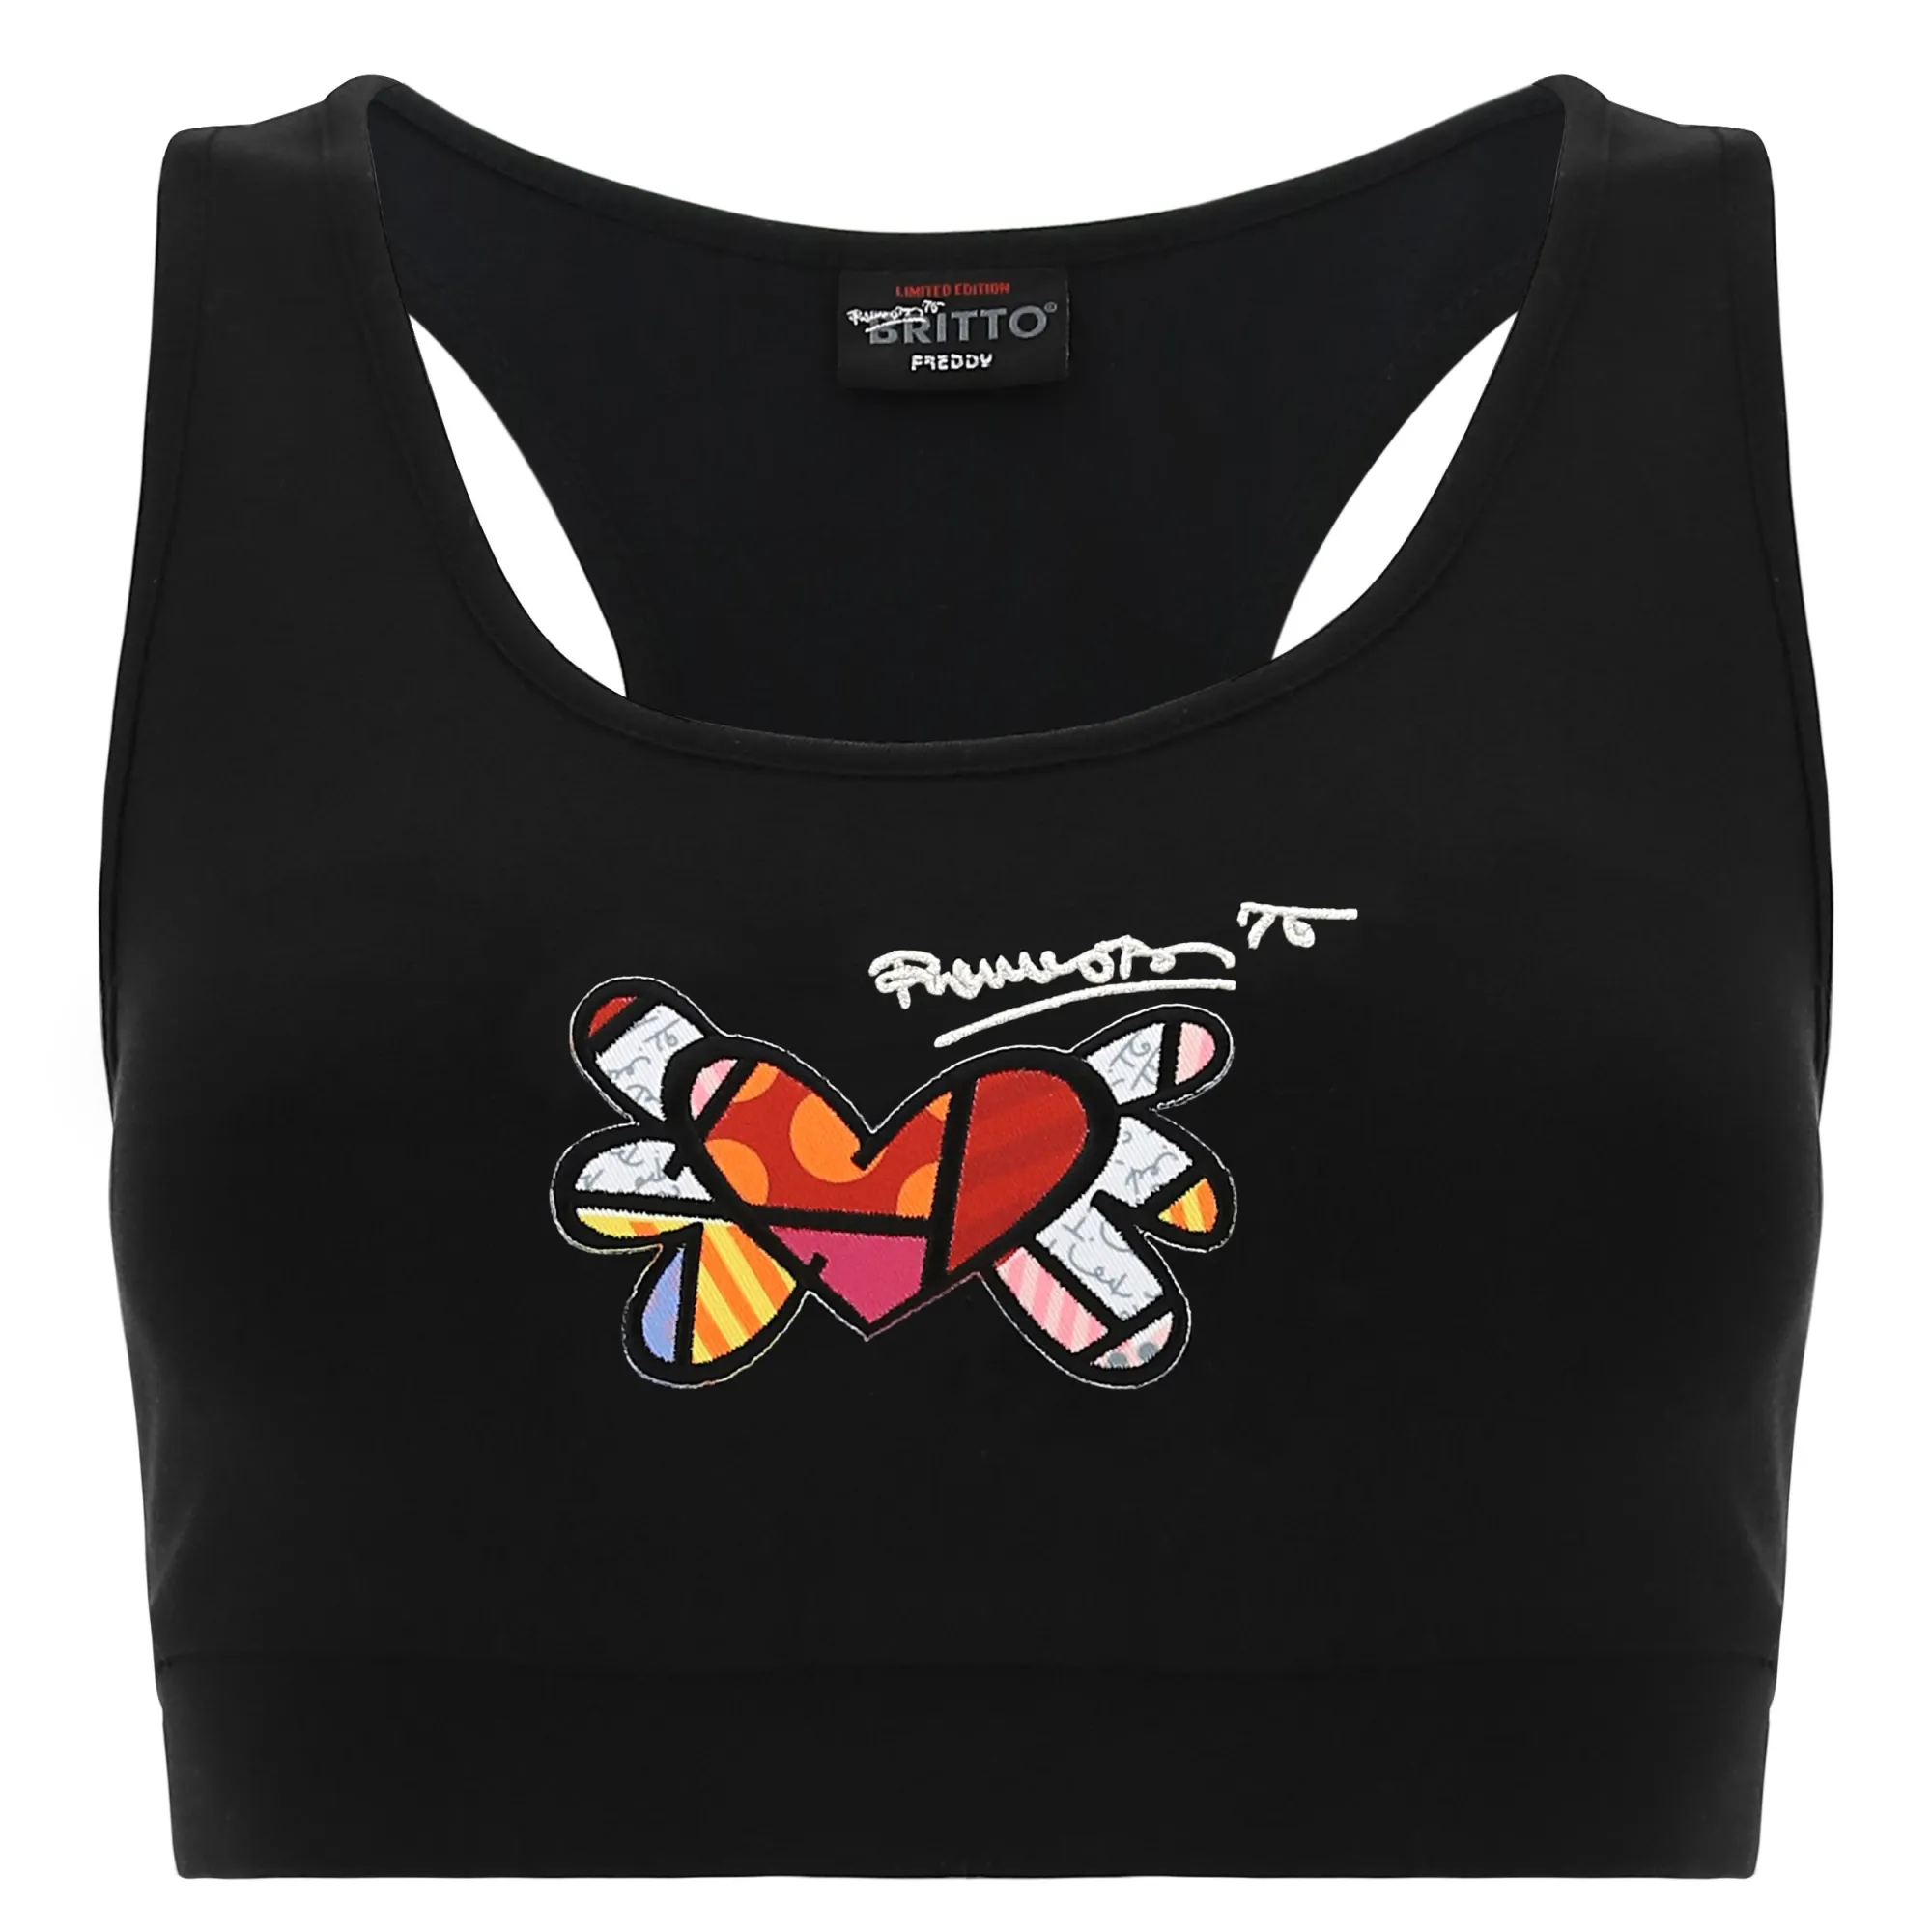 Top With a Winged Heart Patch - Romero Britto Collection.